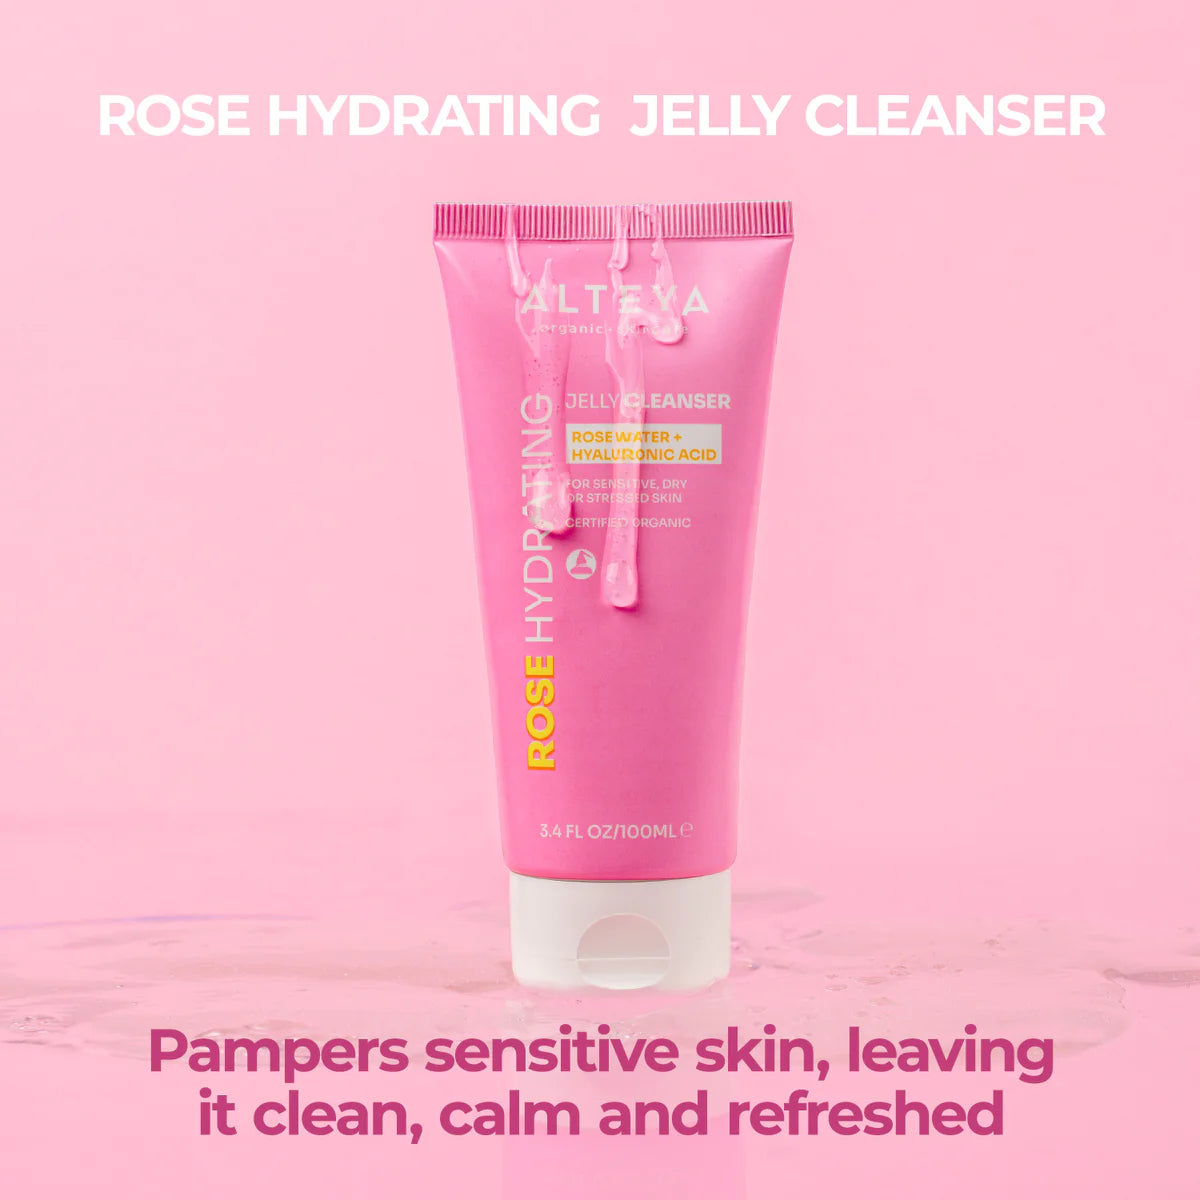 This Alteya Organics Rose Hydrating Jelly Cleanser is formulated with organic rose water, providing a gentle and refreshing cleanse. Infused with hyaluronic acid, it deeply hydrates the skin.